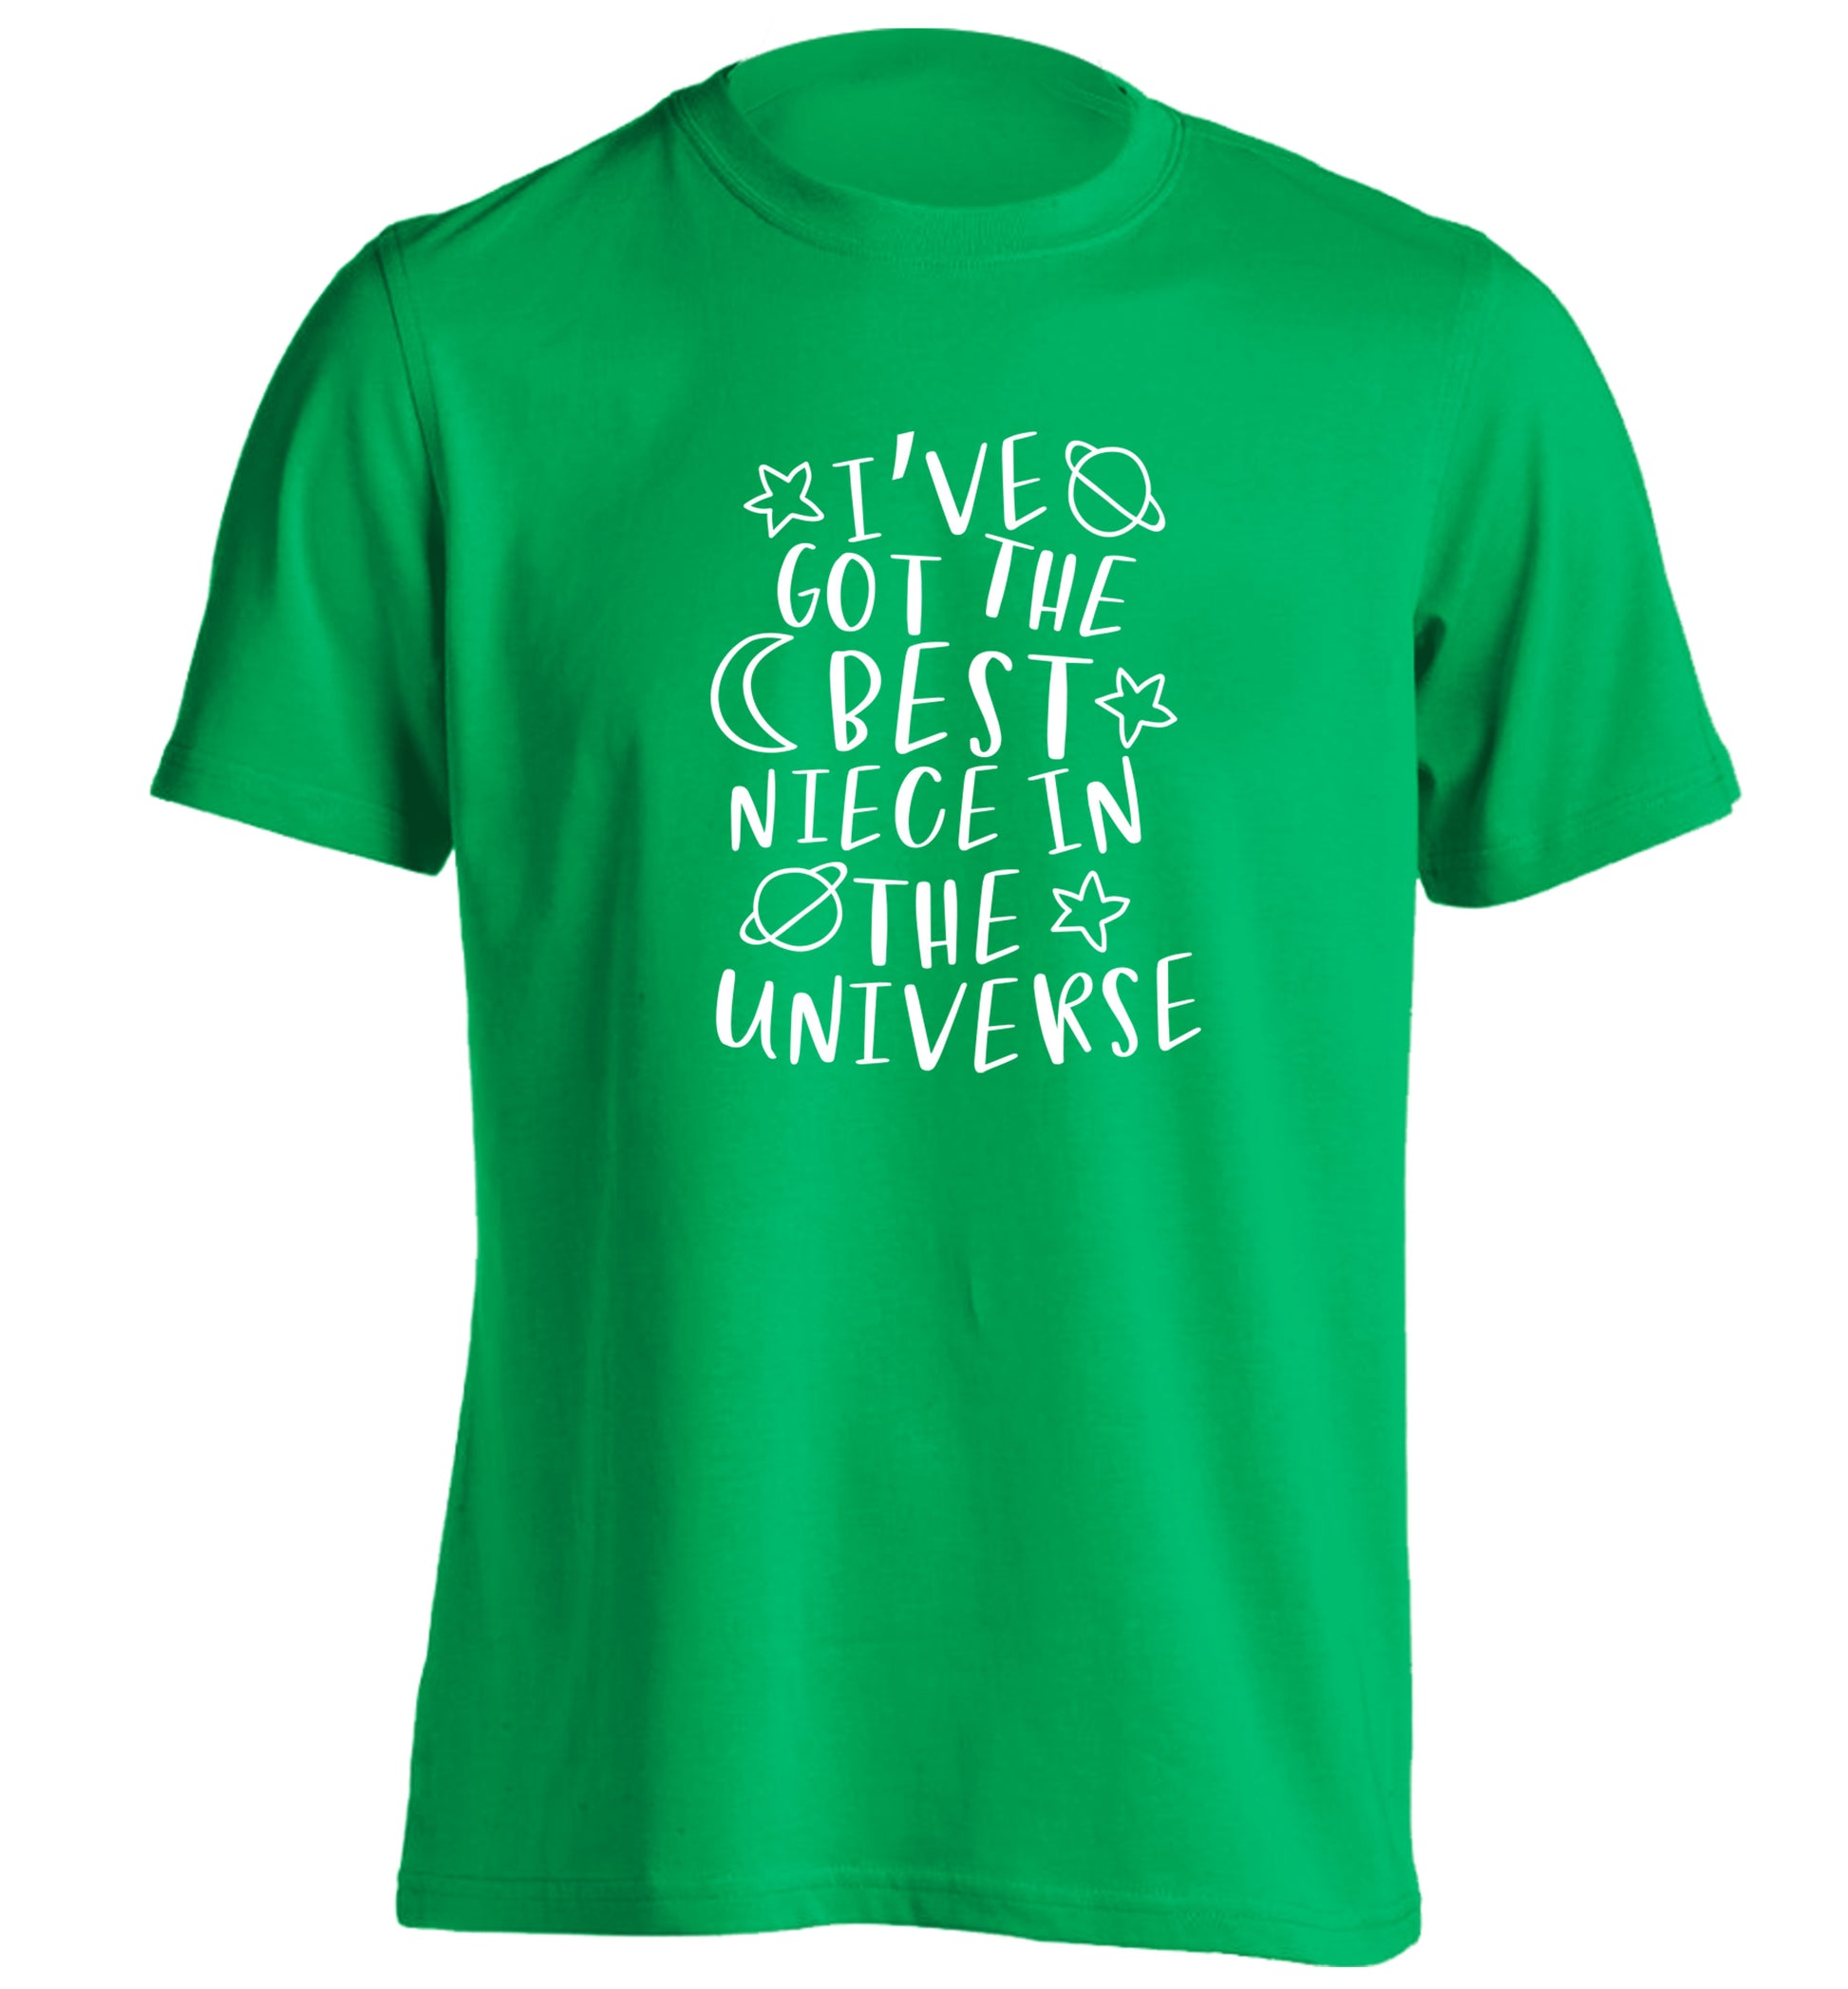 I've got the best niece in the universe adults unisex green Tshirt 2XL